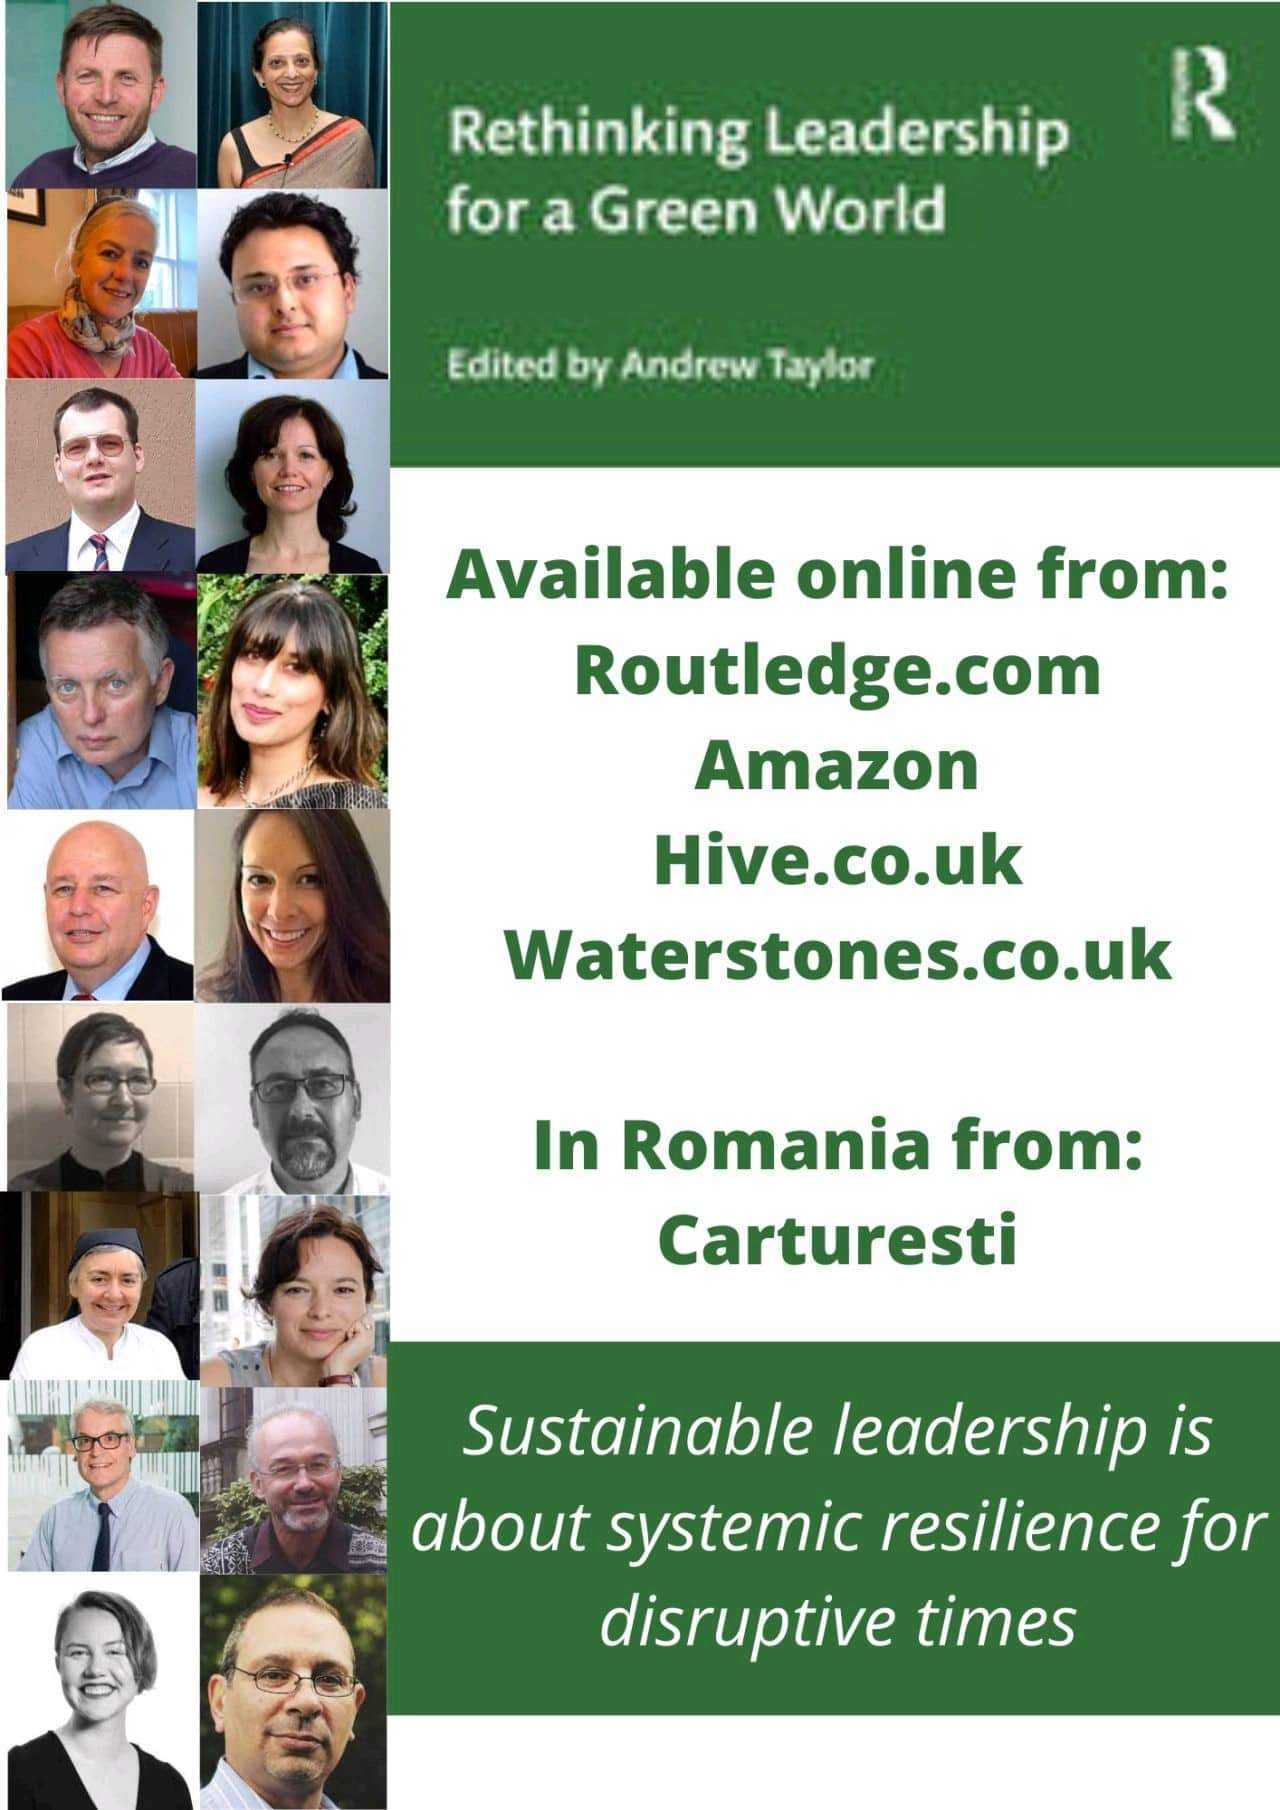 Authors of book on climate change: Rethinking Leadership for a Green World